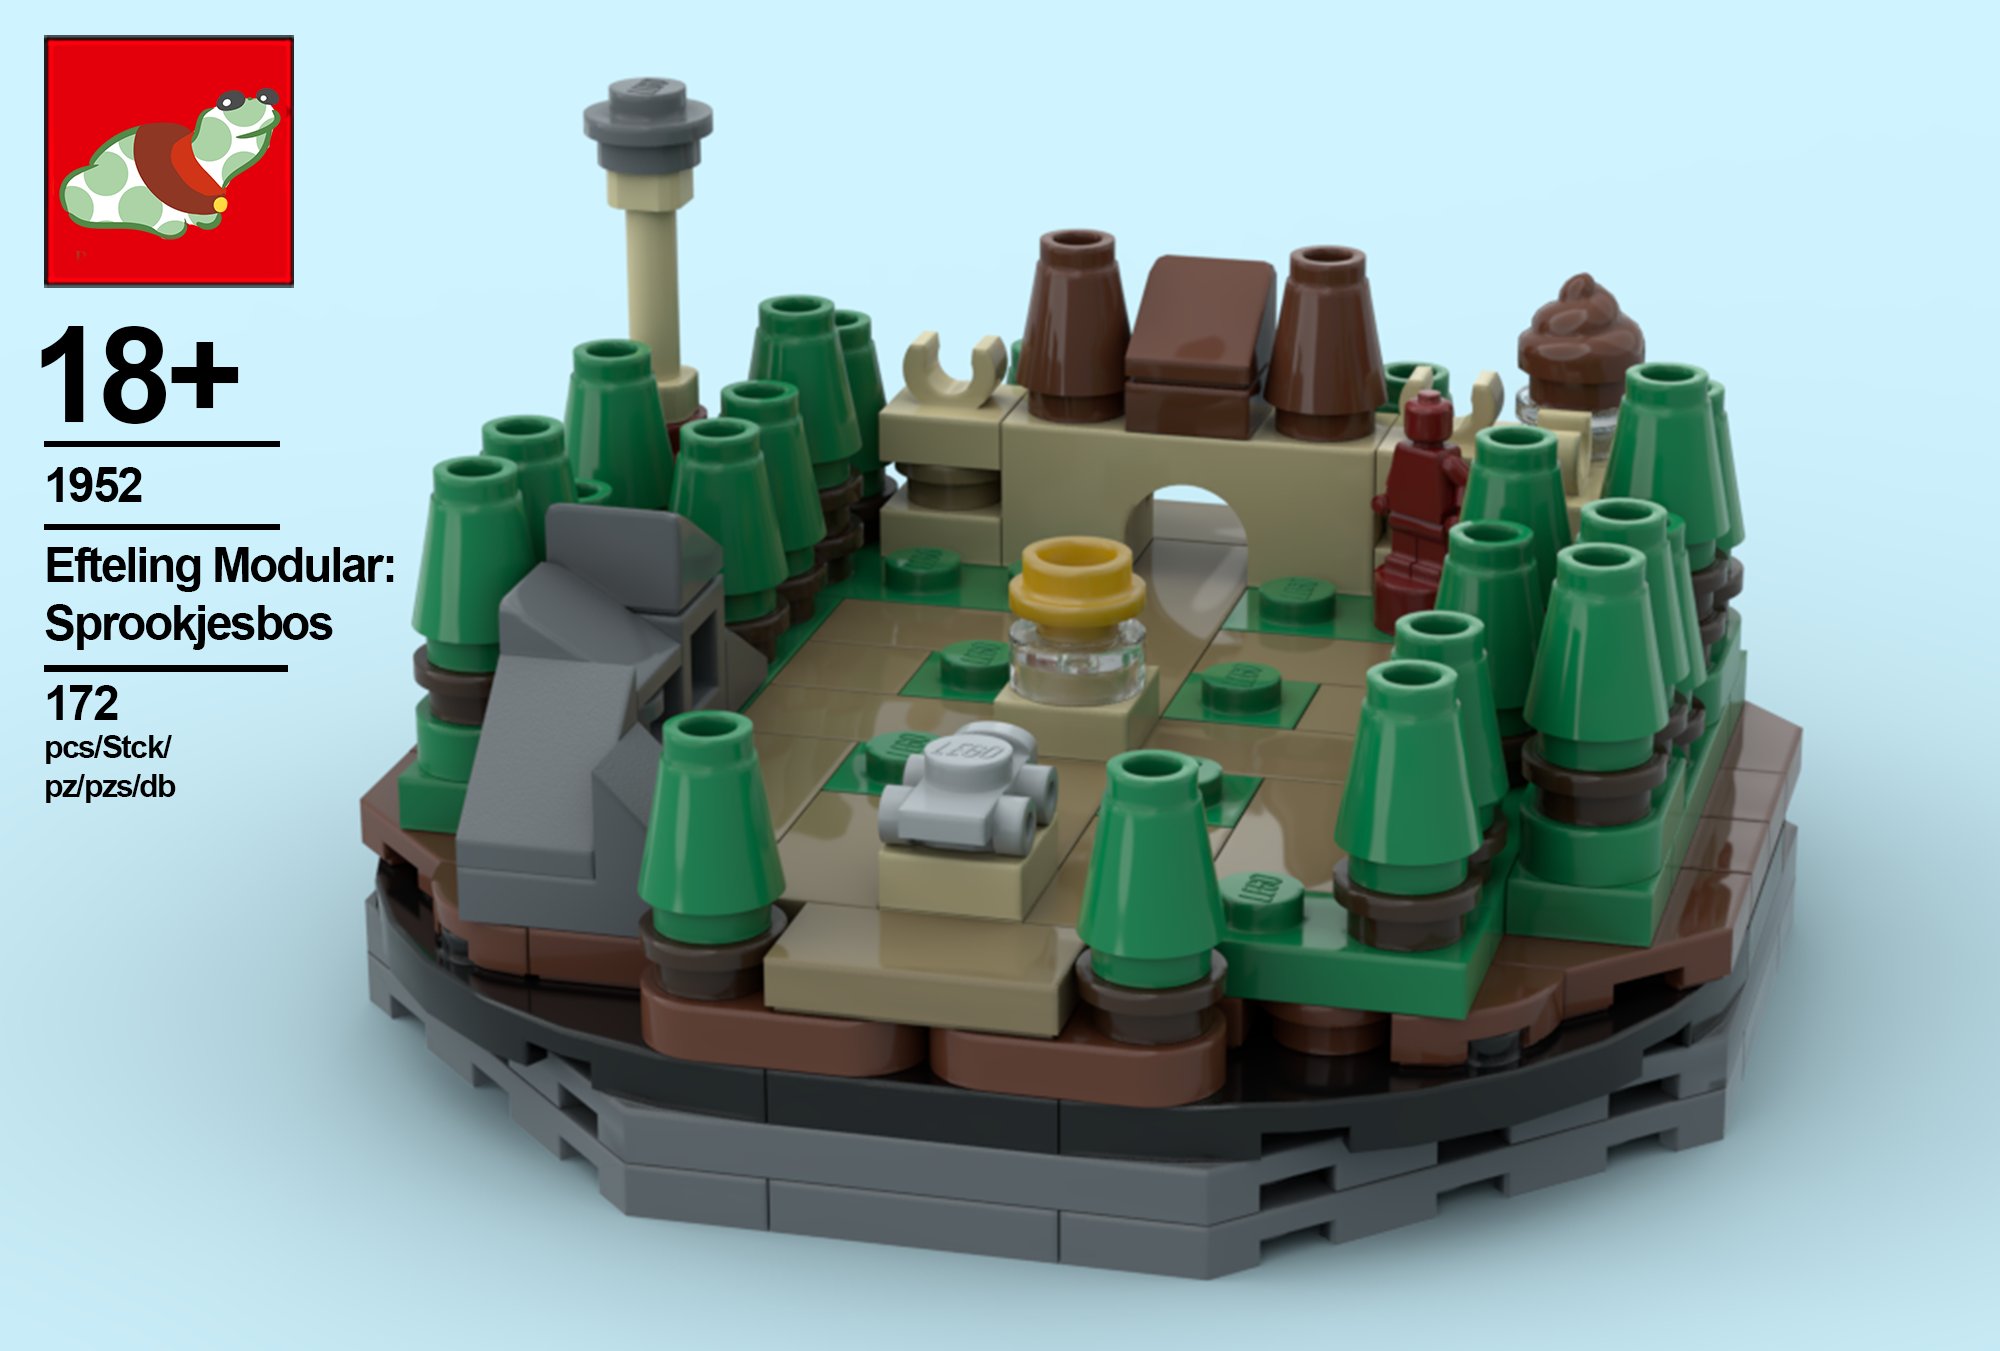 Tom on Twitter: "The sixth Efteling modular set is available! #Efteling #Lego #Sprookjesbos https://t.co/HStpQpb7Er" / Twitter